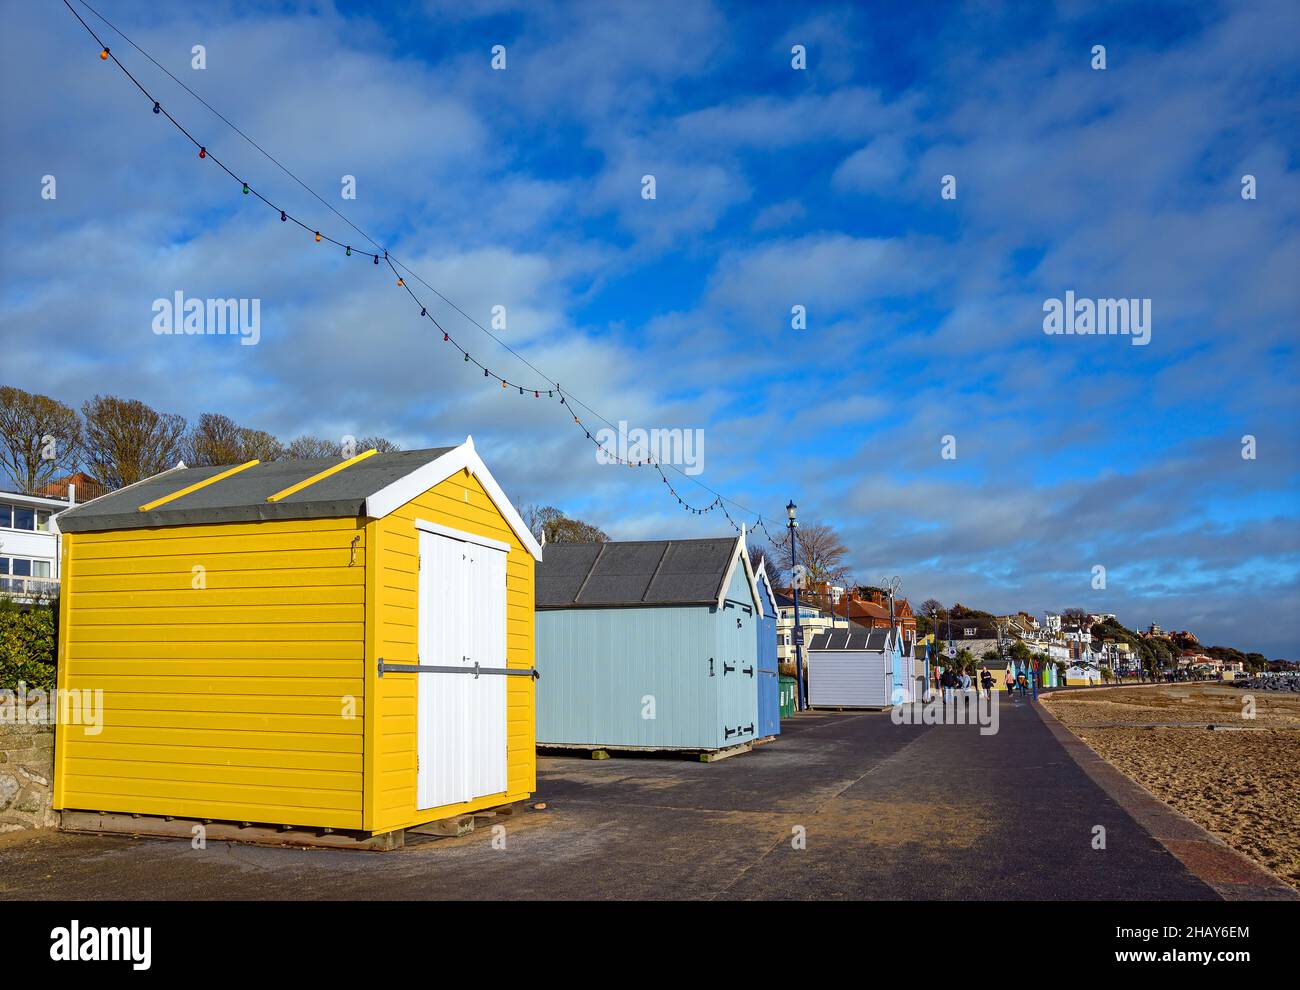 Felixstowe, Suffolk, UK : The promenade in the English resort town of Felixstowe with people walking past a line of bright colorful beach huts. Stock Photo